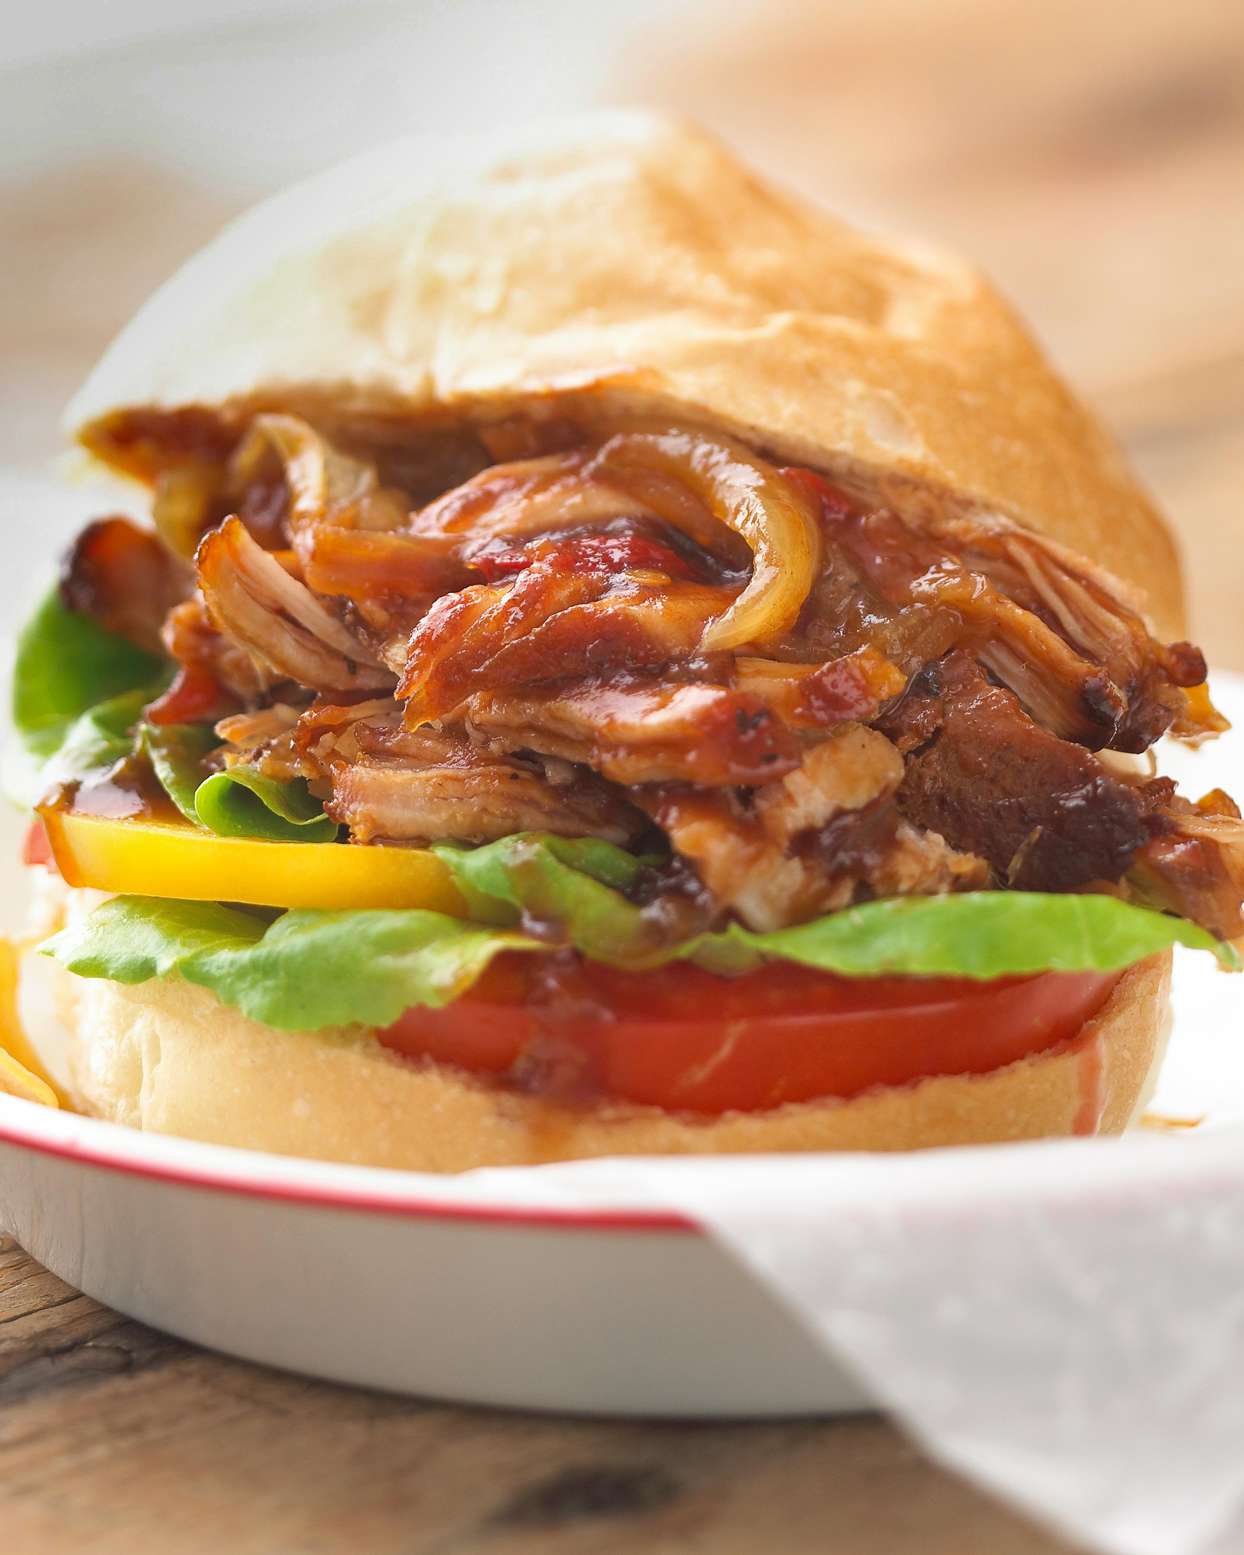 Pulled Pork Sandwiches with Root Beer Barbecue Sauce